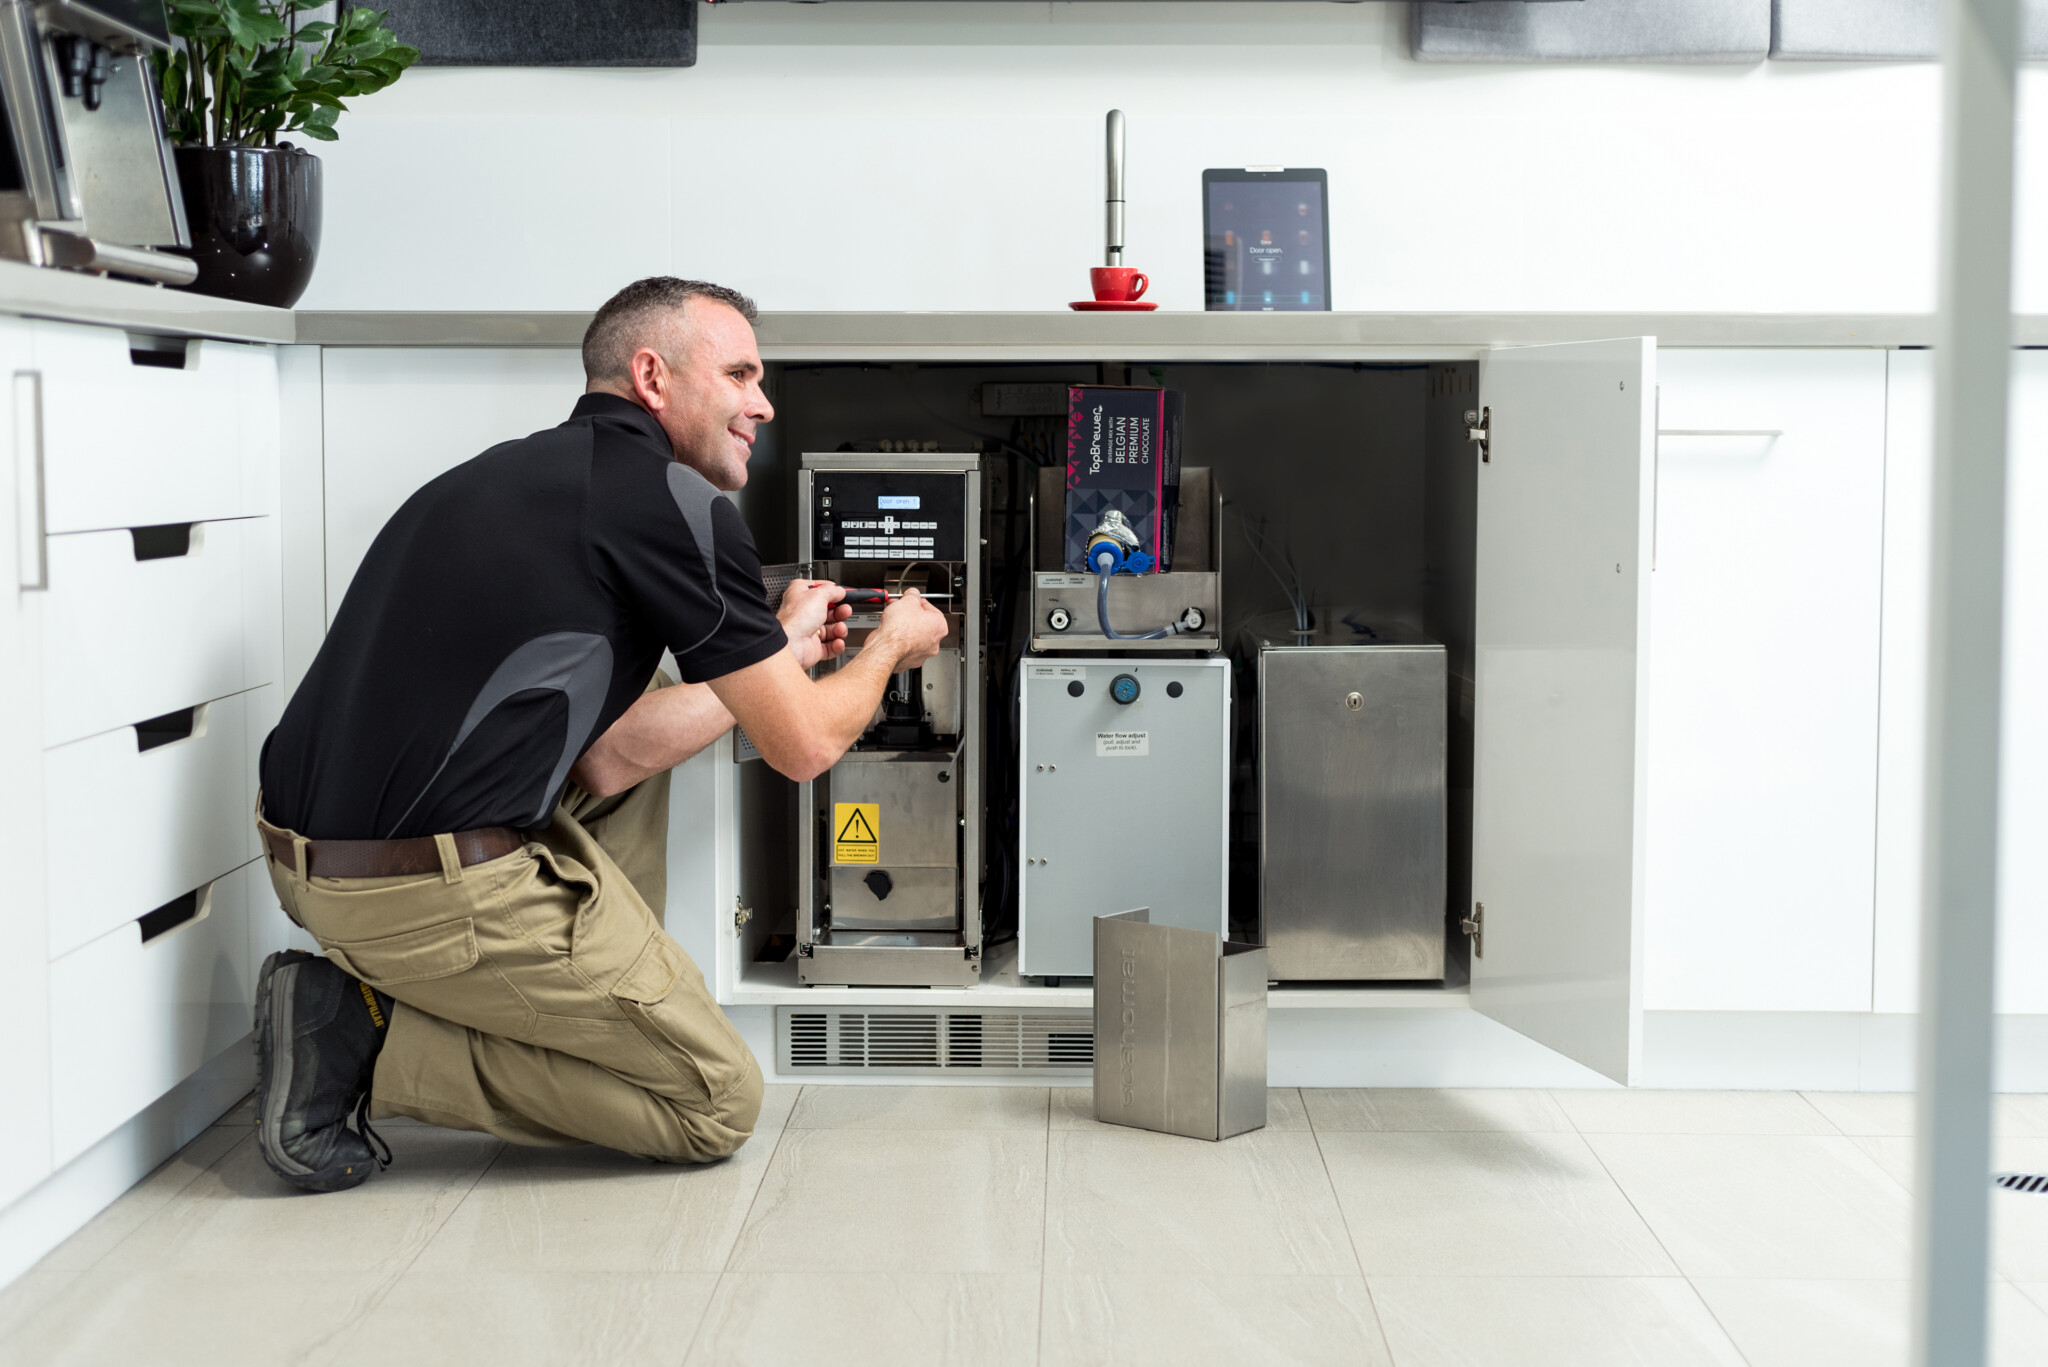 TopBrewer Australia delivers servicing in Australia by local technicians from Brewhub